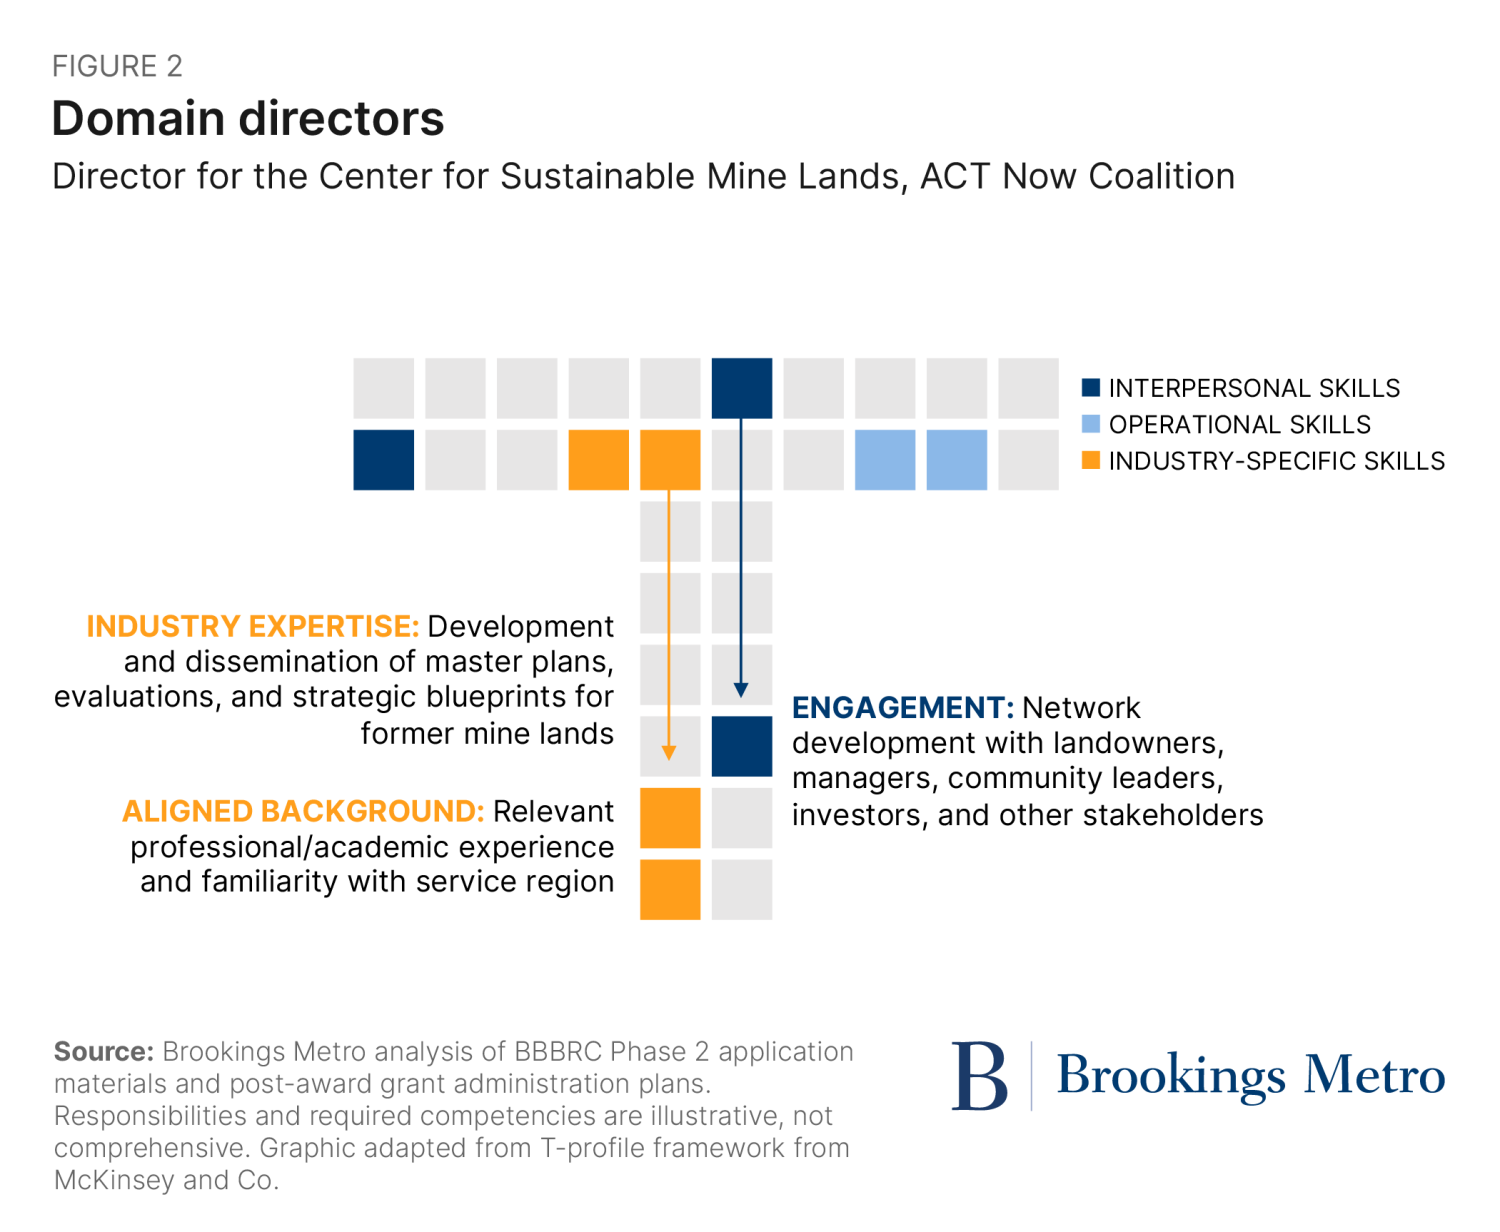 Figure 2. DOMAIN DIRECTORS. Director for the Center for Sustainable Mine Lands, ACT Now Coalition